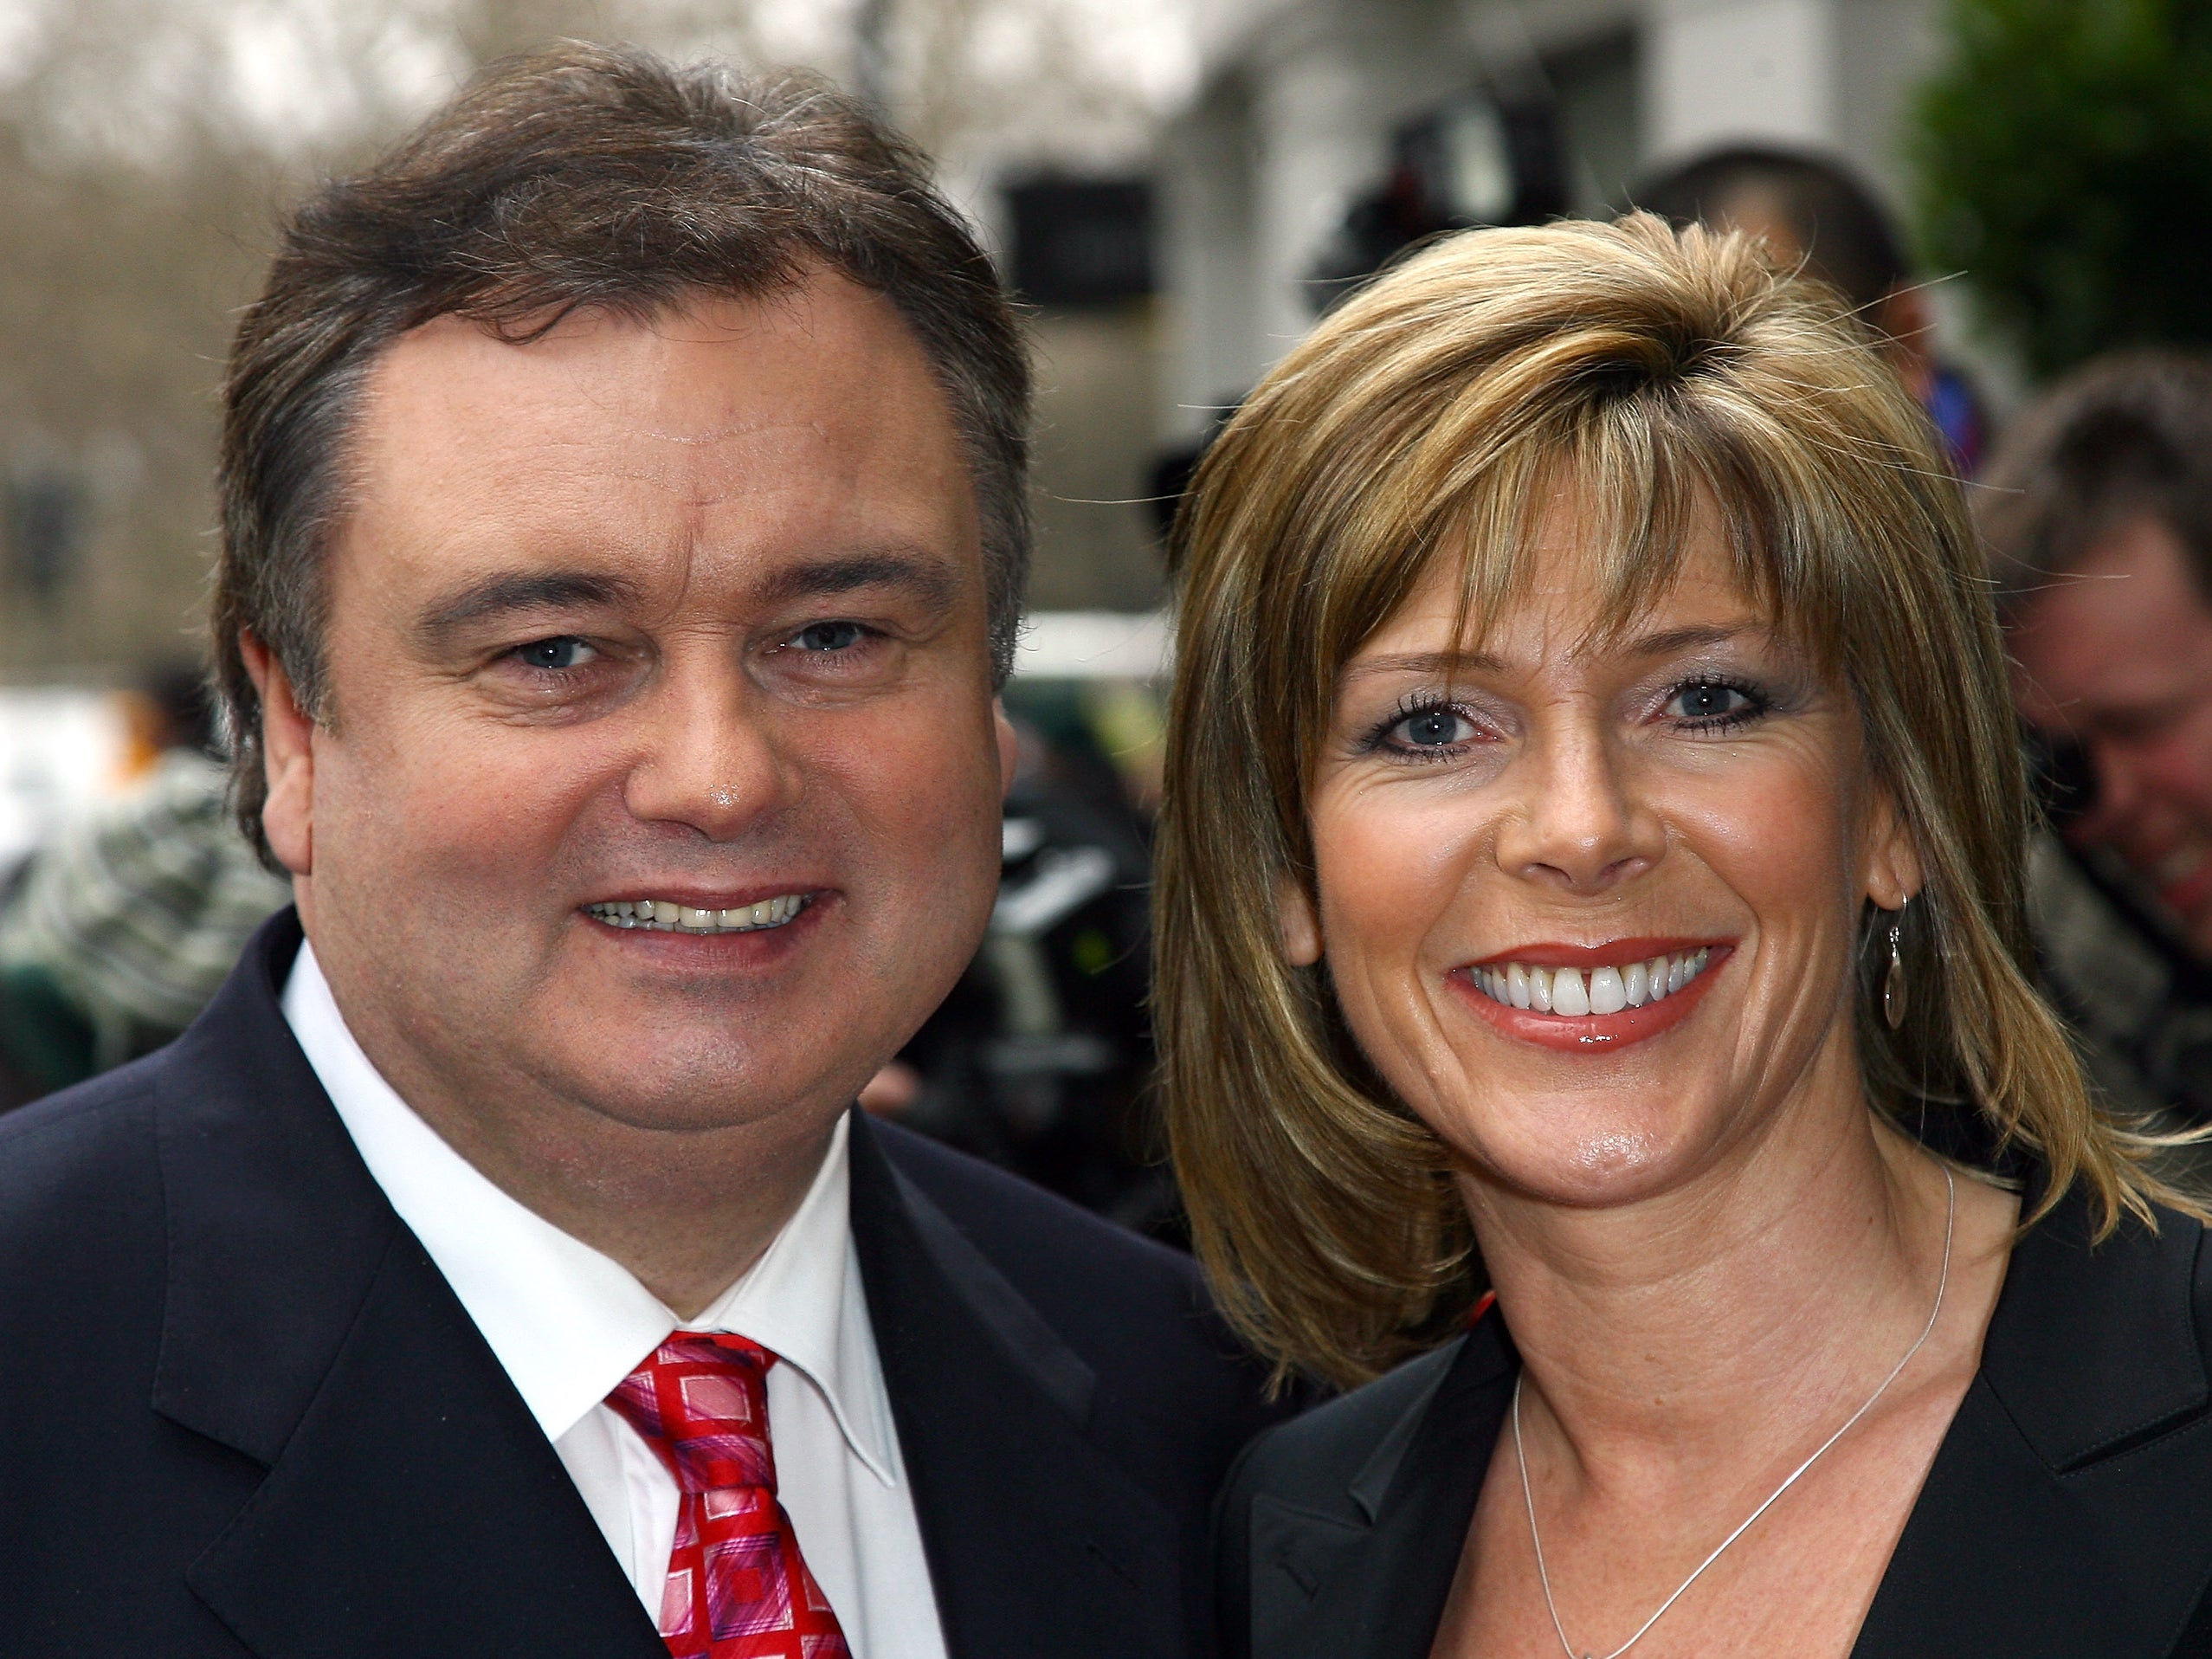 Eamonn Holmes and Ruth Langsford photographed in 2008